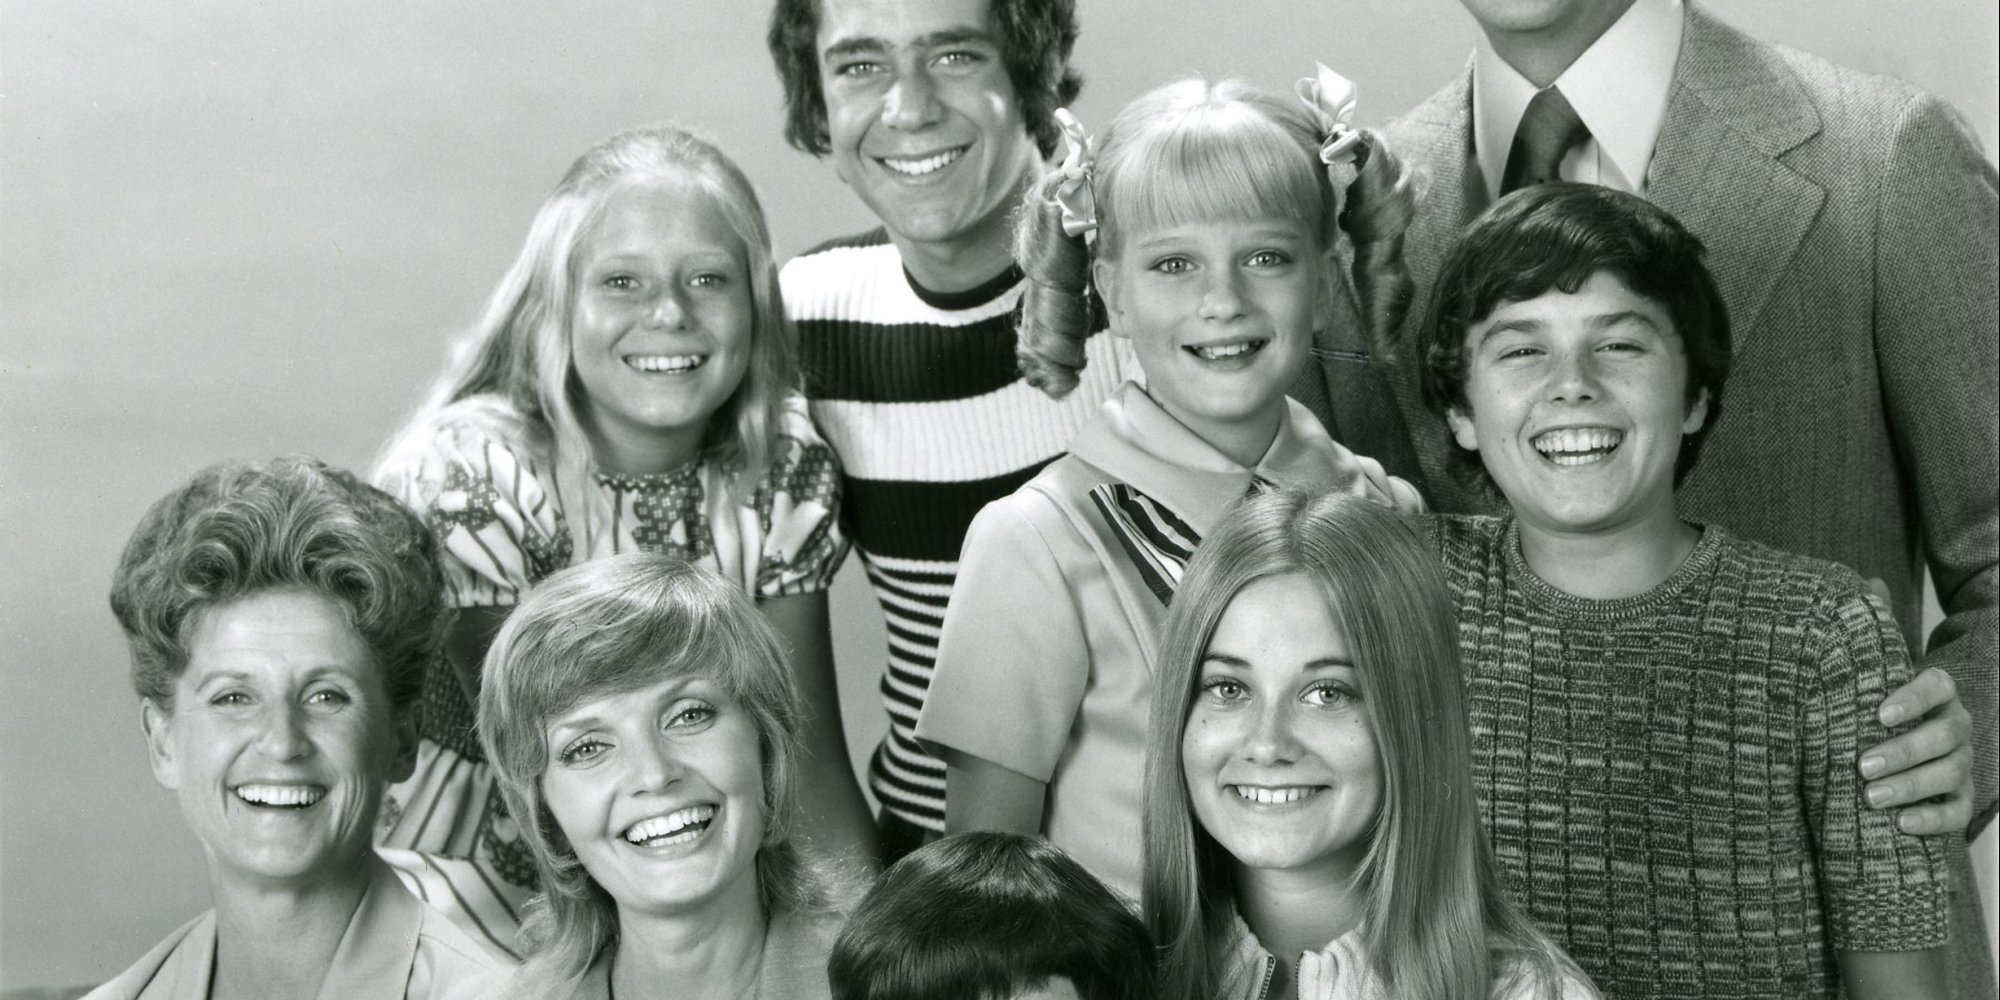 5 Things You Probably Never Knew About The Brady Bunch.